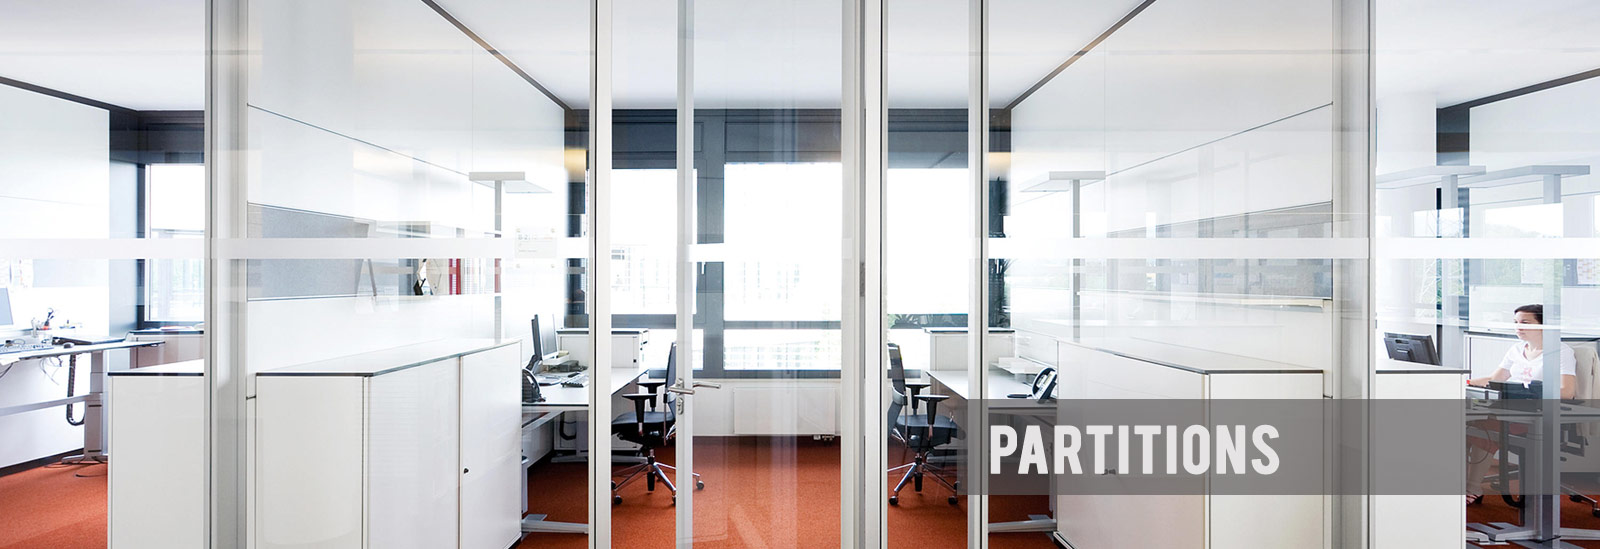 Partitions-banner